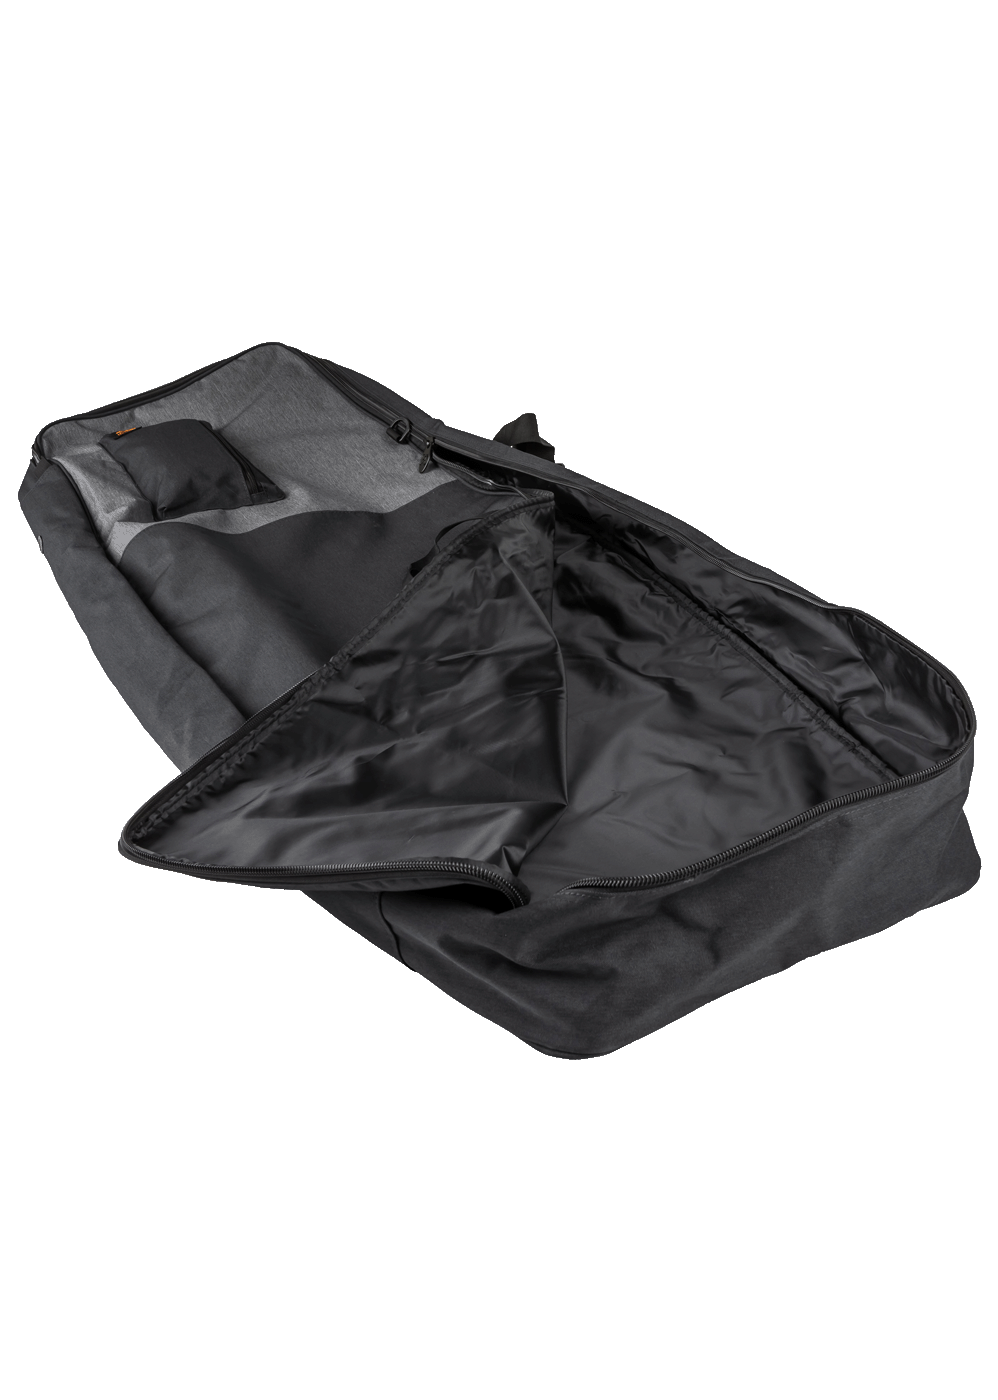 2022 Ronix Bags Collateral Non-Padded Board Case Inset 4 copy